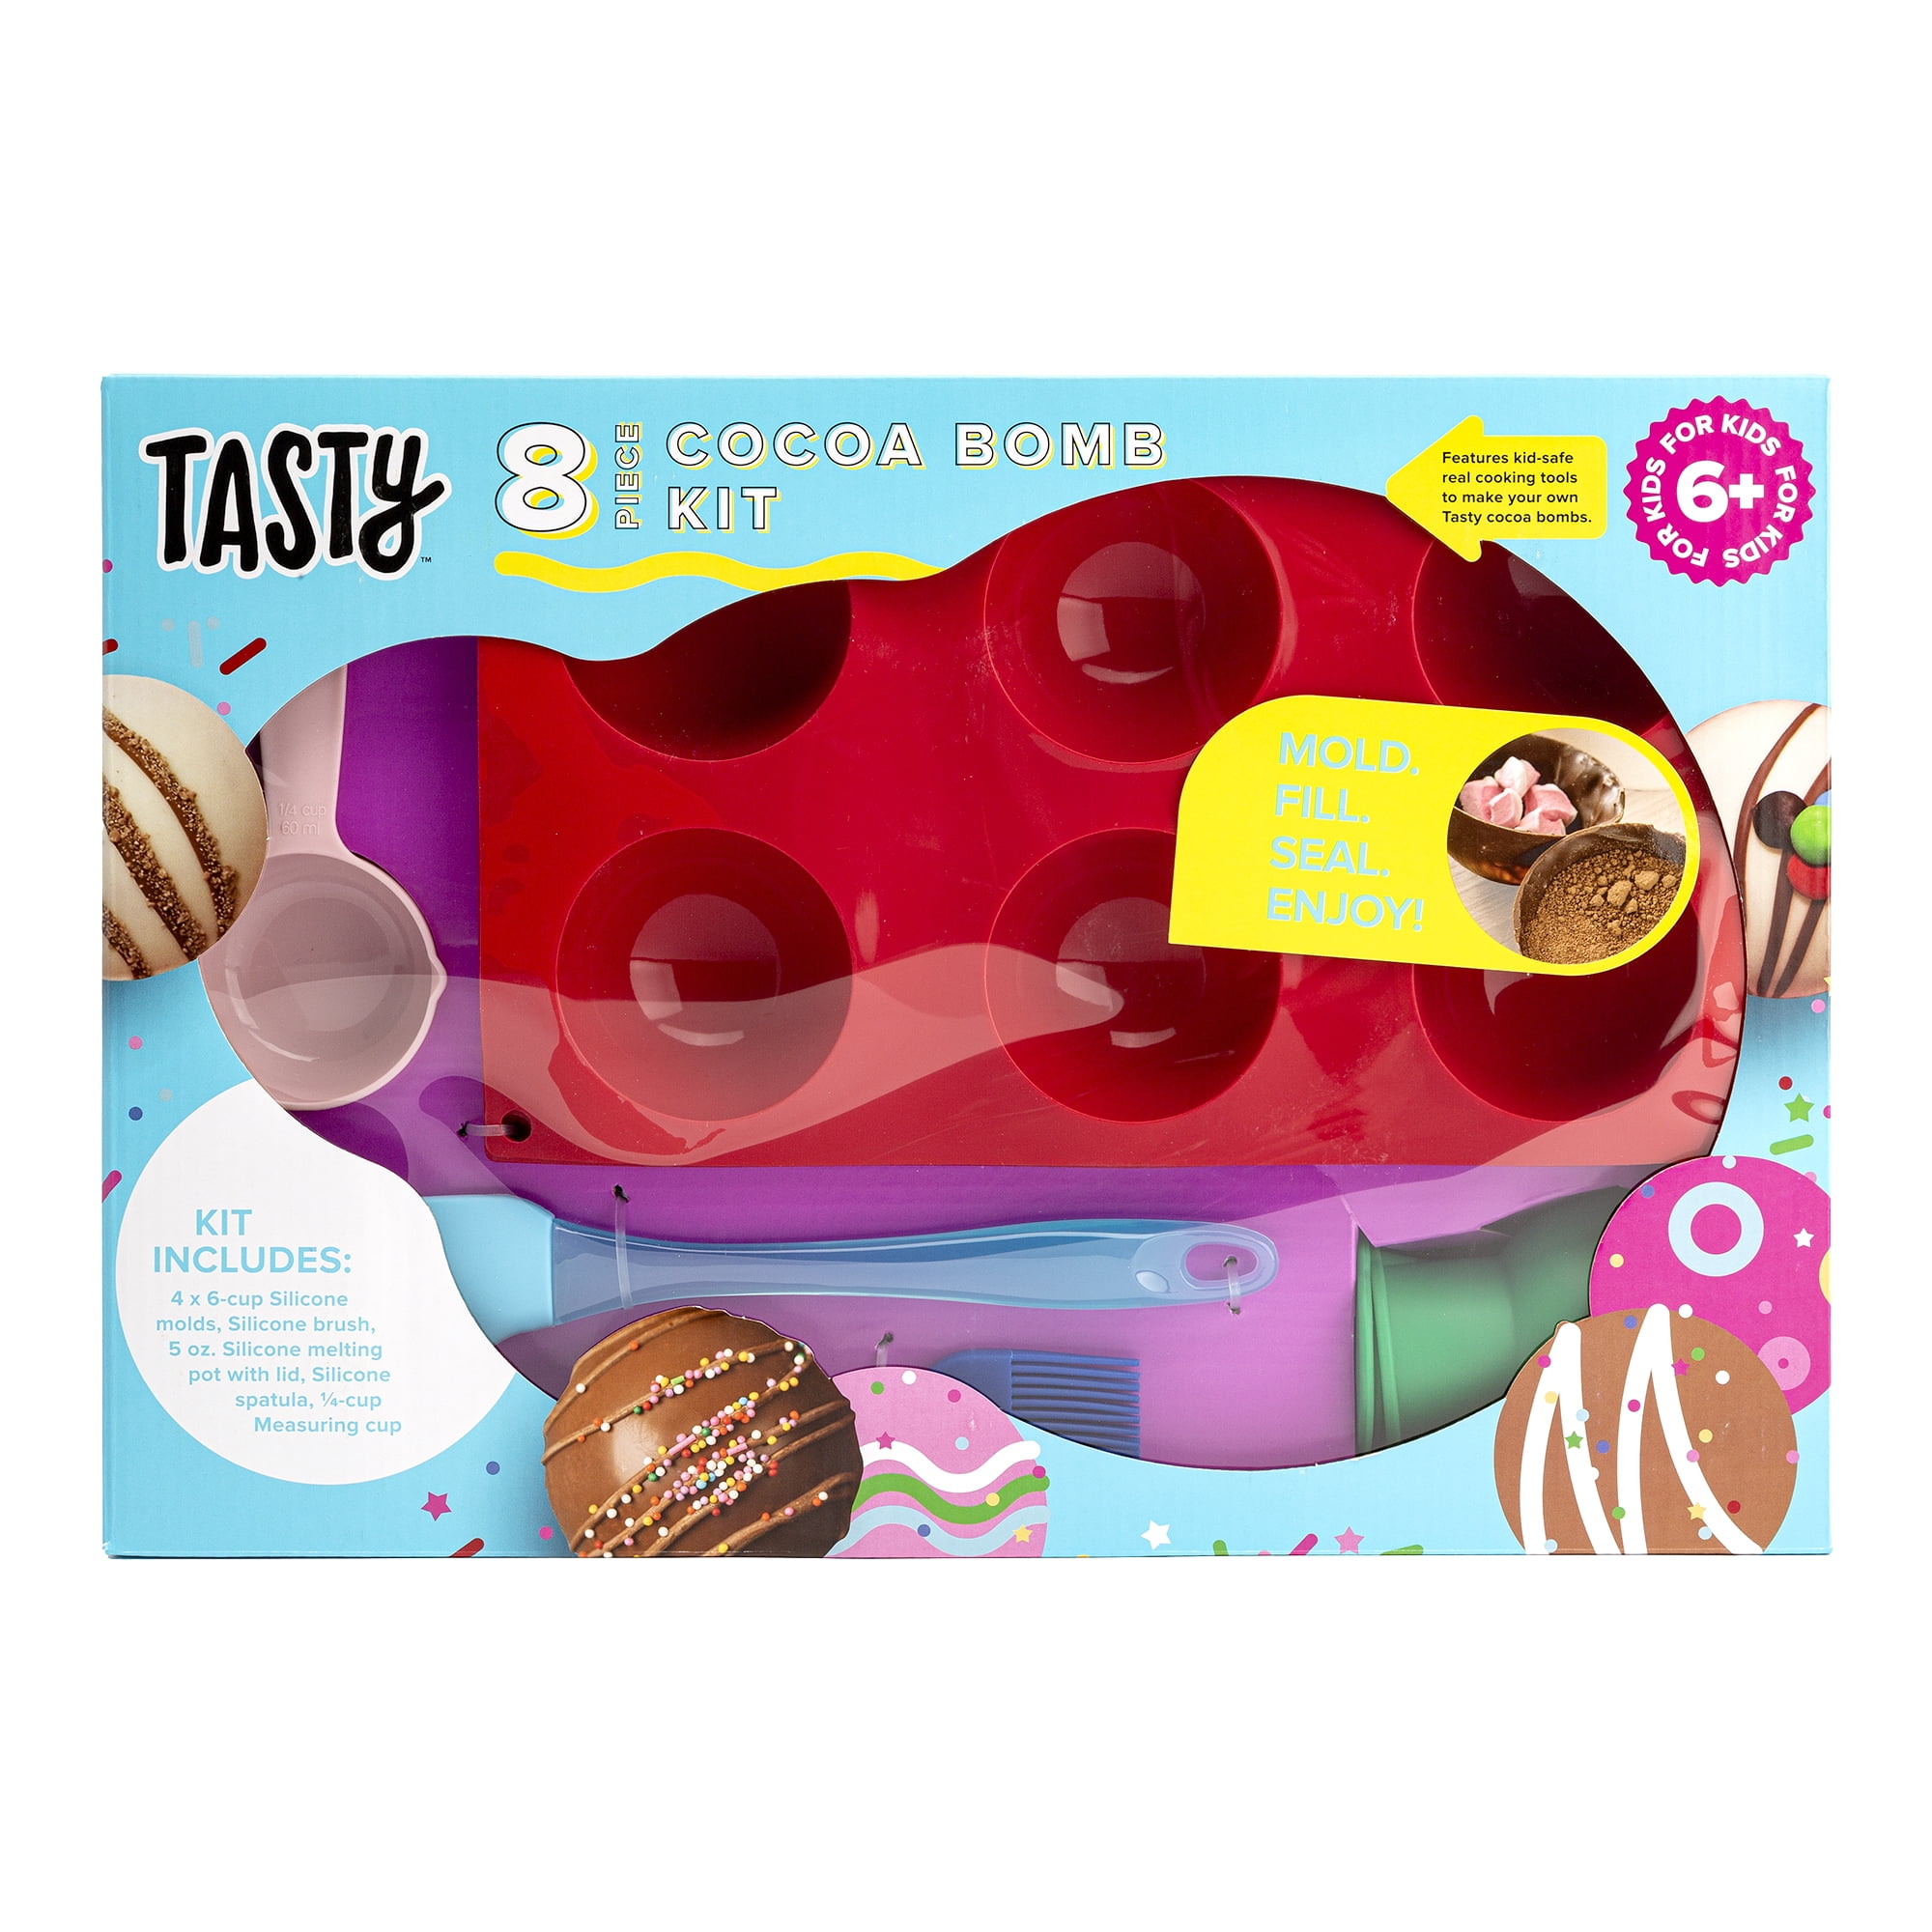 Tasty Kits Hot Chocolate Bomb Gift Set, Includes Kid-Safe Real Cooking Tools, Multi-color, 8 Piece image